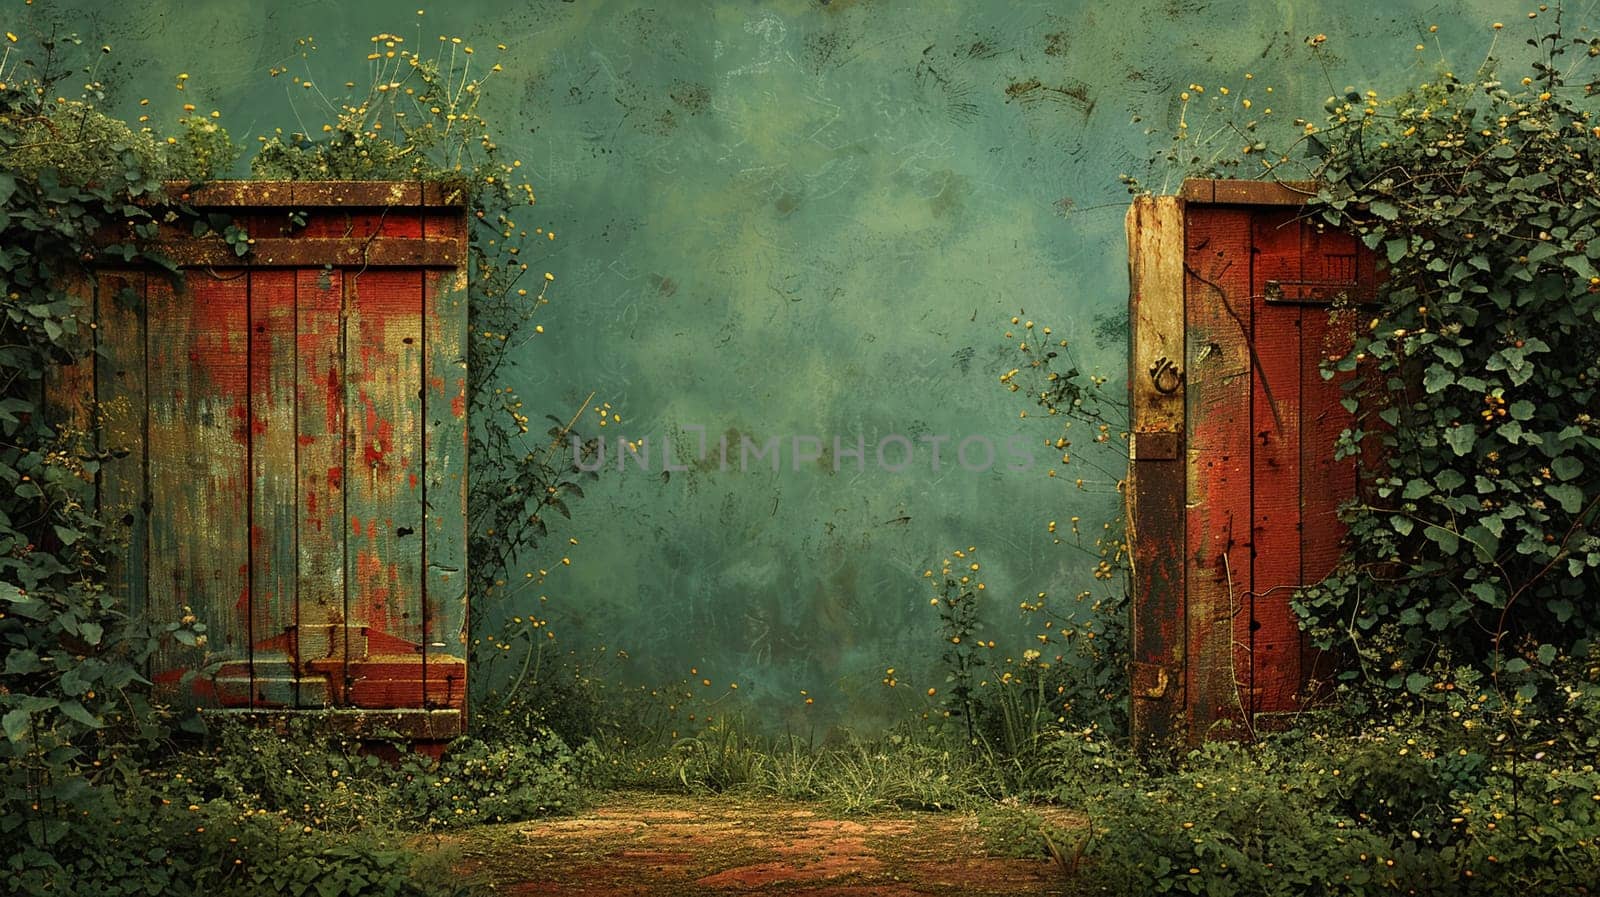 Weathered Garden Gate Opening to a Secret Garden, The gate blurs with the green, an invitation to a secluded paradise.